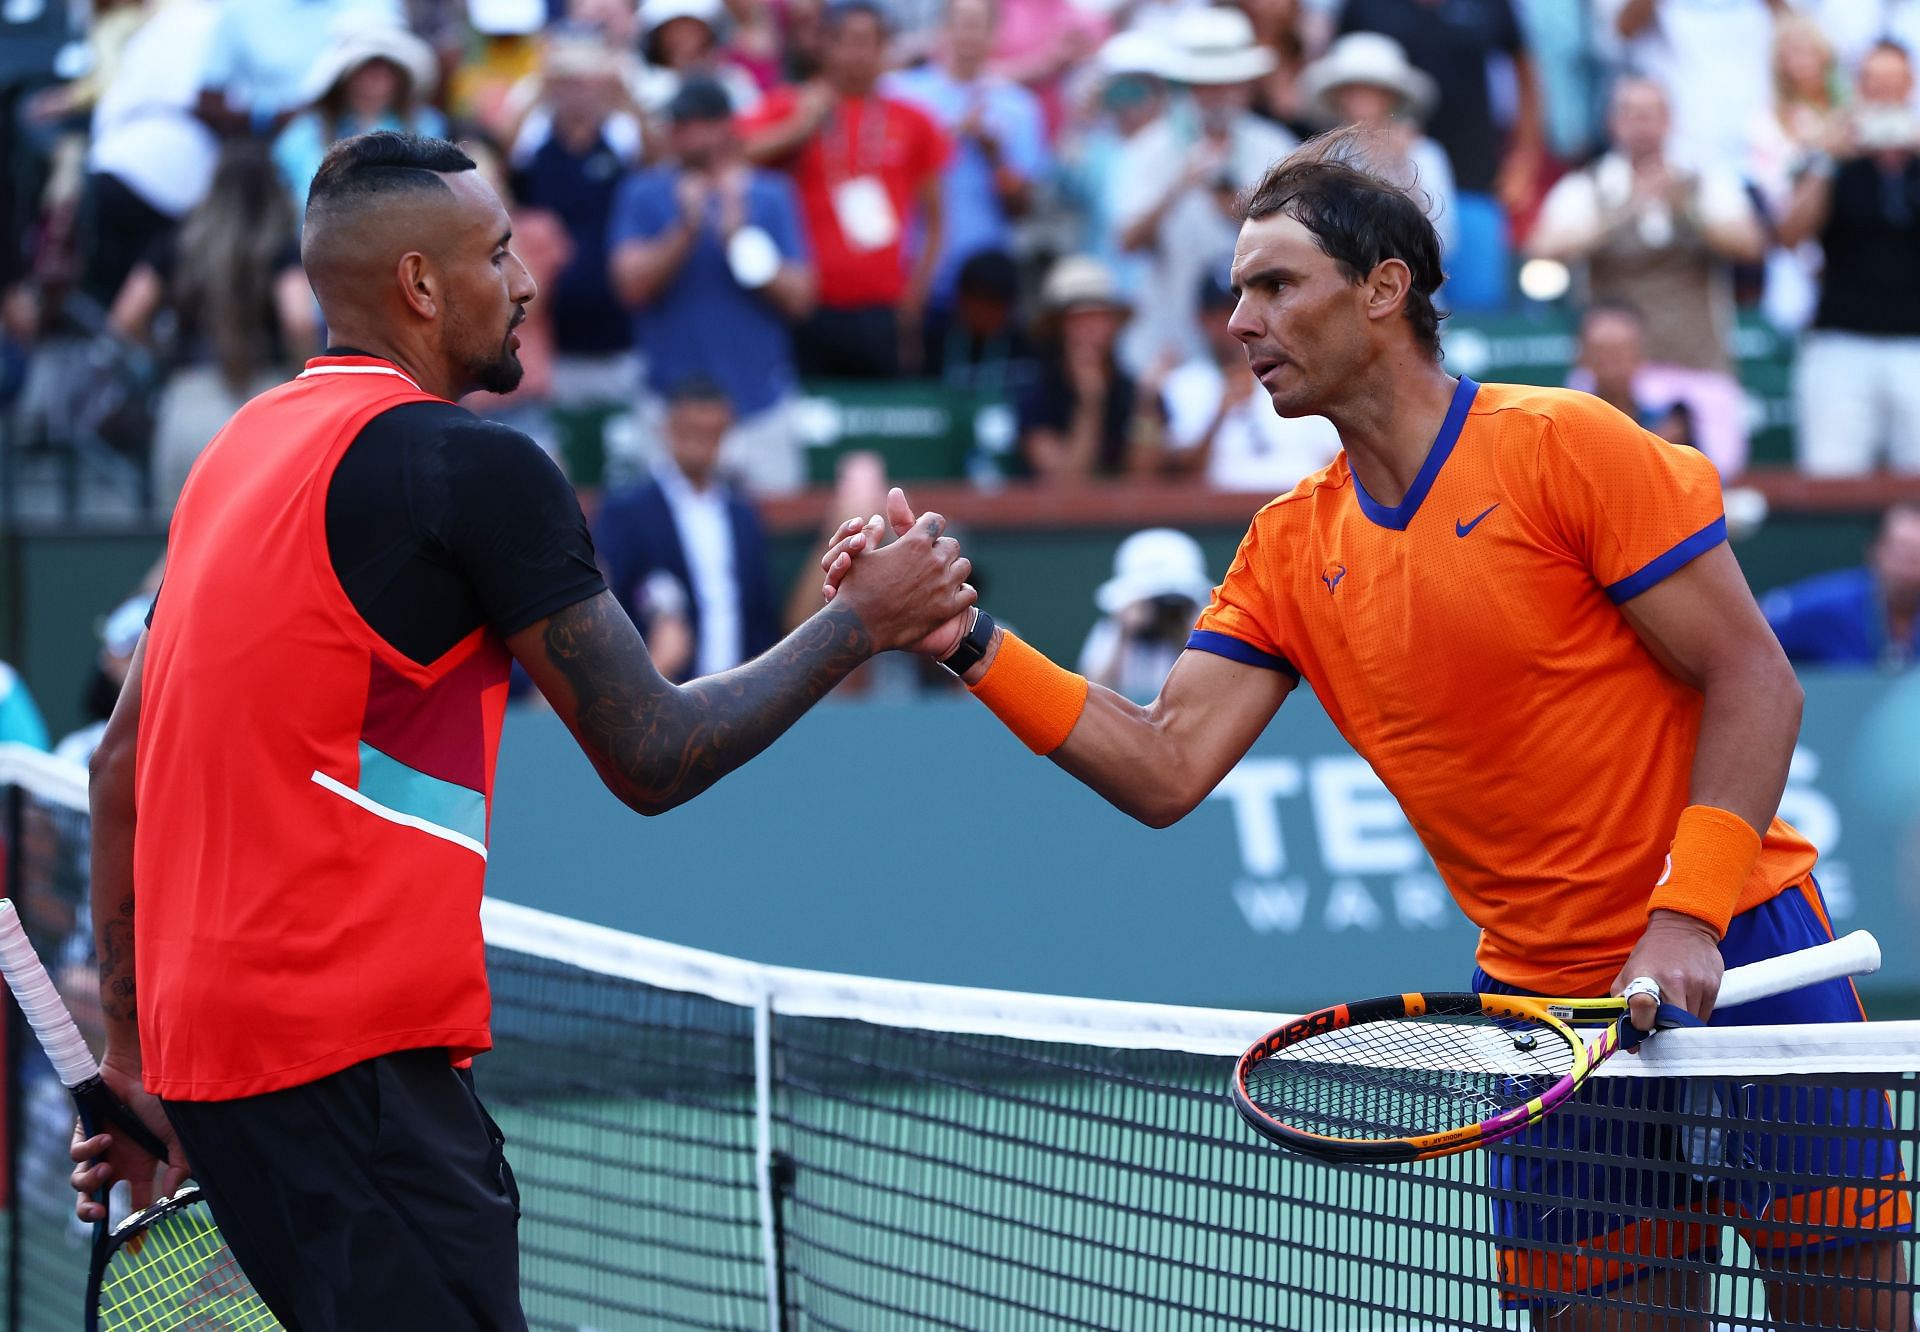 Rafael Nadal and Nick Kyrgios after their match in Indian Wells in 2022